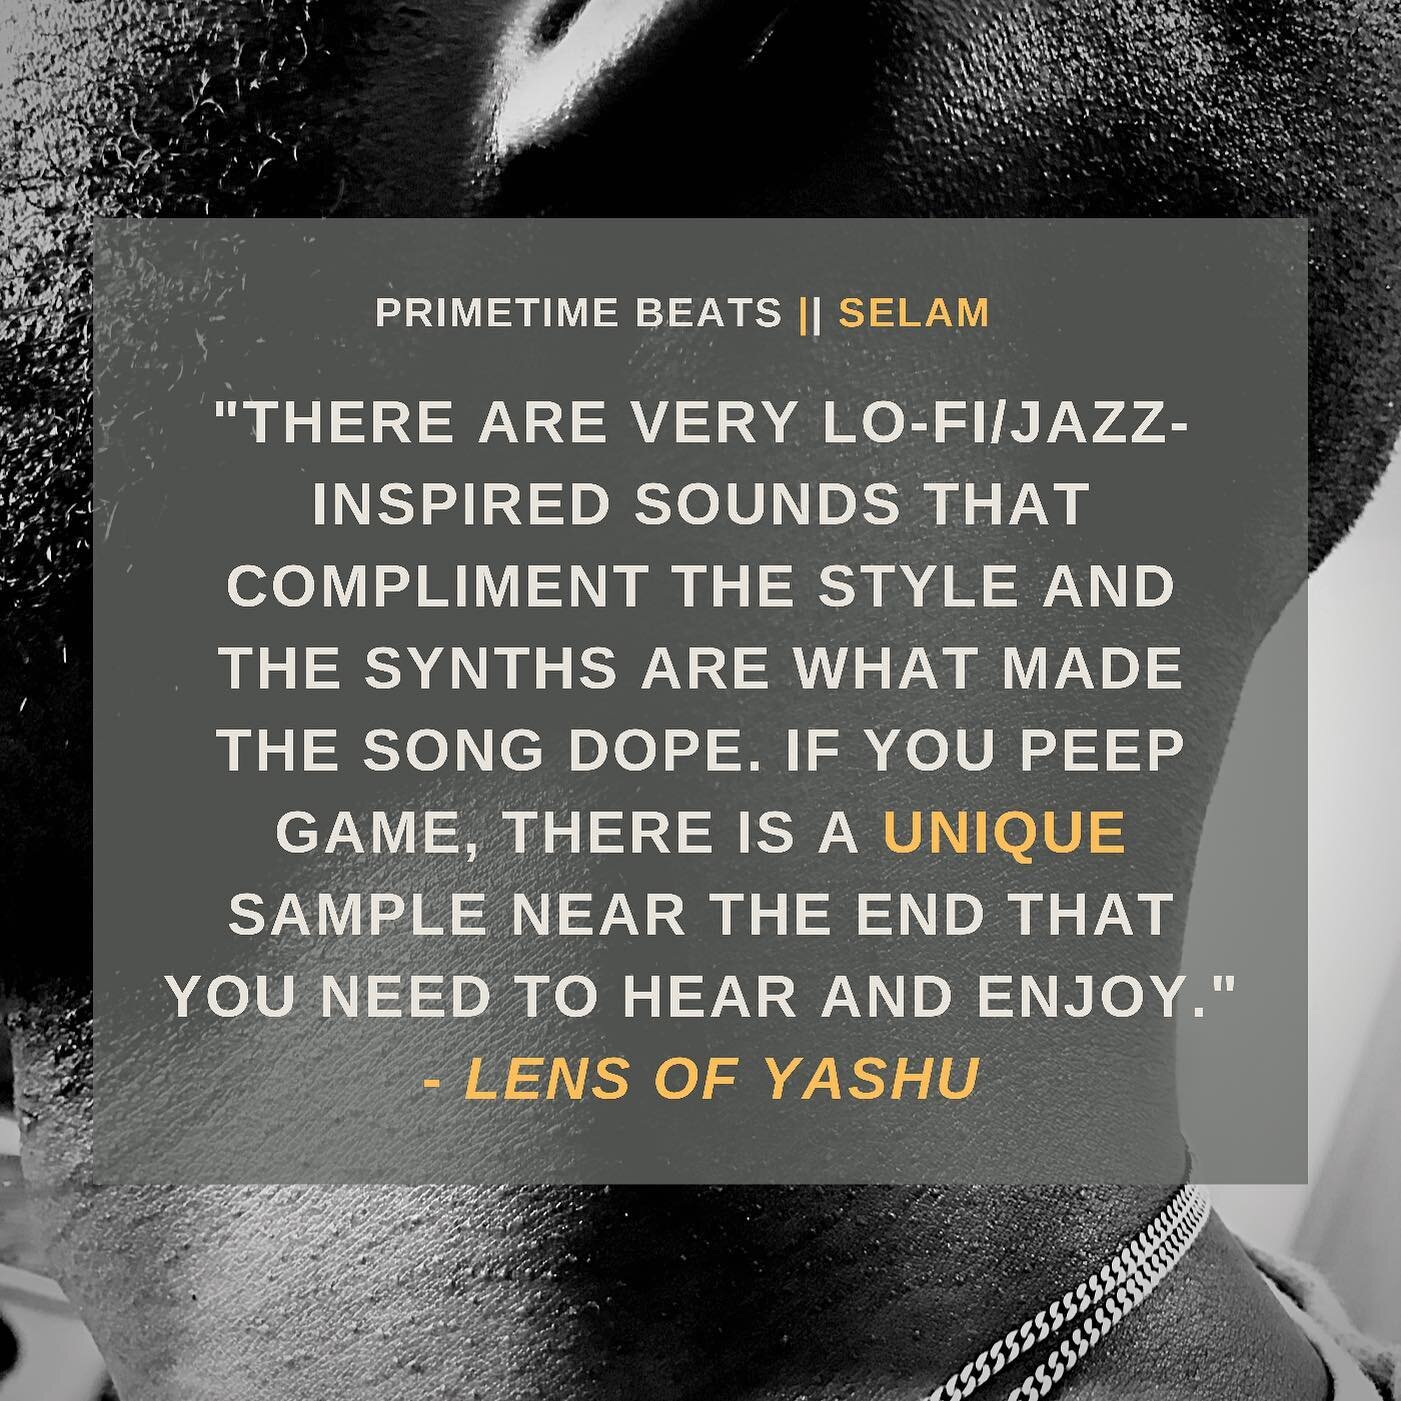 Selam was the last song added to The Life Cycle. 

 See the Full interview on @lensofyashu YouTube channel for the full story and meaning behind the song. Link in his bio.

#primetimebeats #lensofyashu #albumreview #interview #thelifecycle #jamaica #